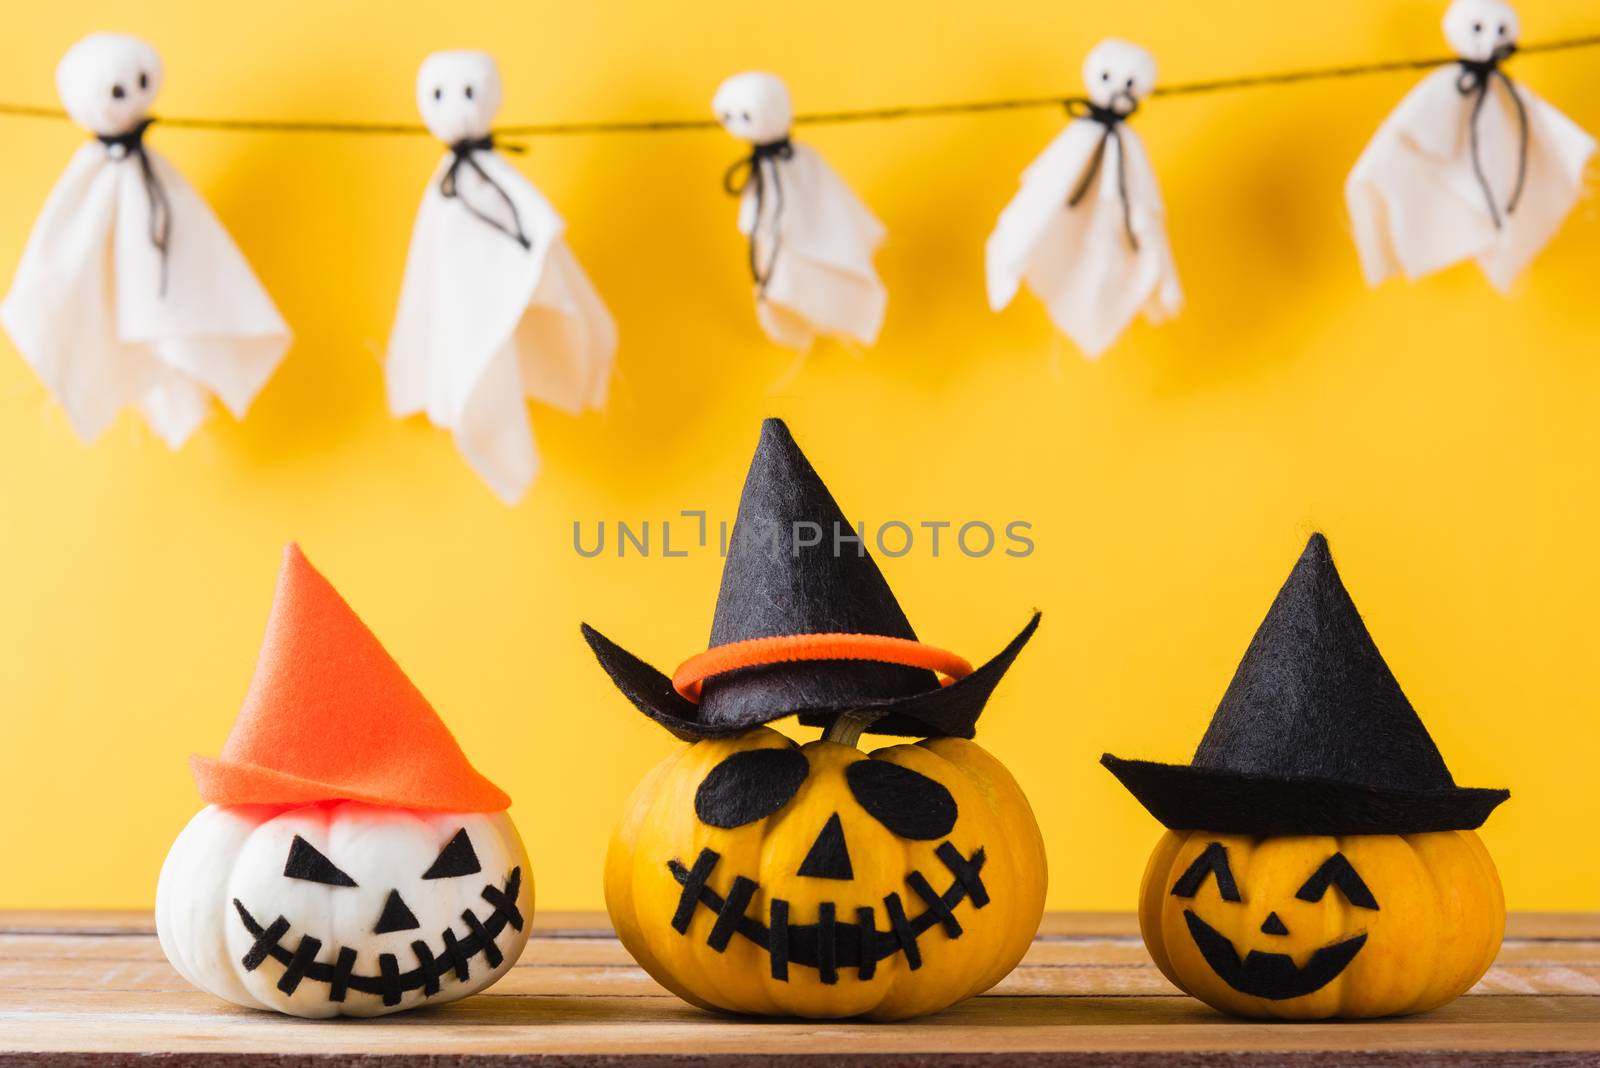 Funny Halloween day decoration party, Baby cute white ghost crafts scary face hanging and halloween pumpkin head jack lantern smile and spider on wooden, studio shot isolated, Happy holiday concept